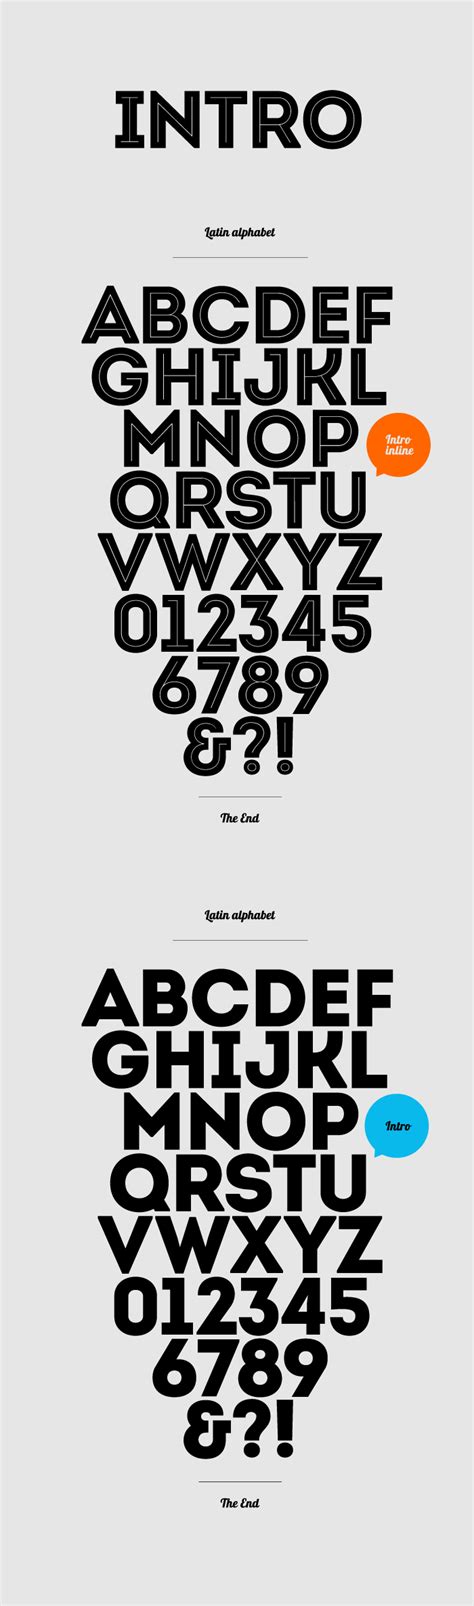 great  fonts   designs